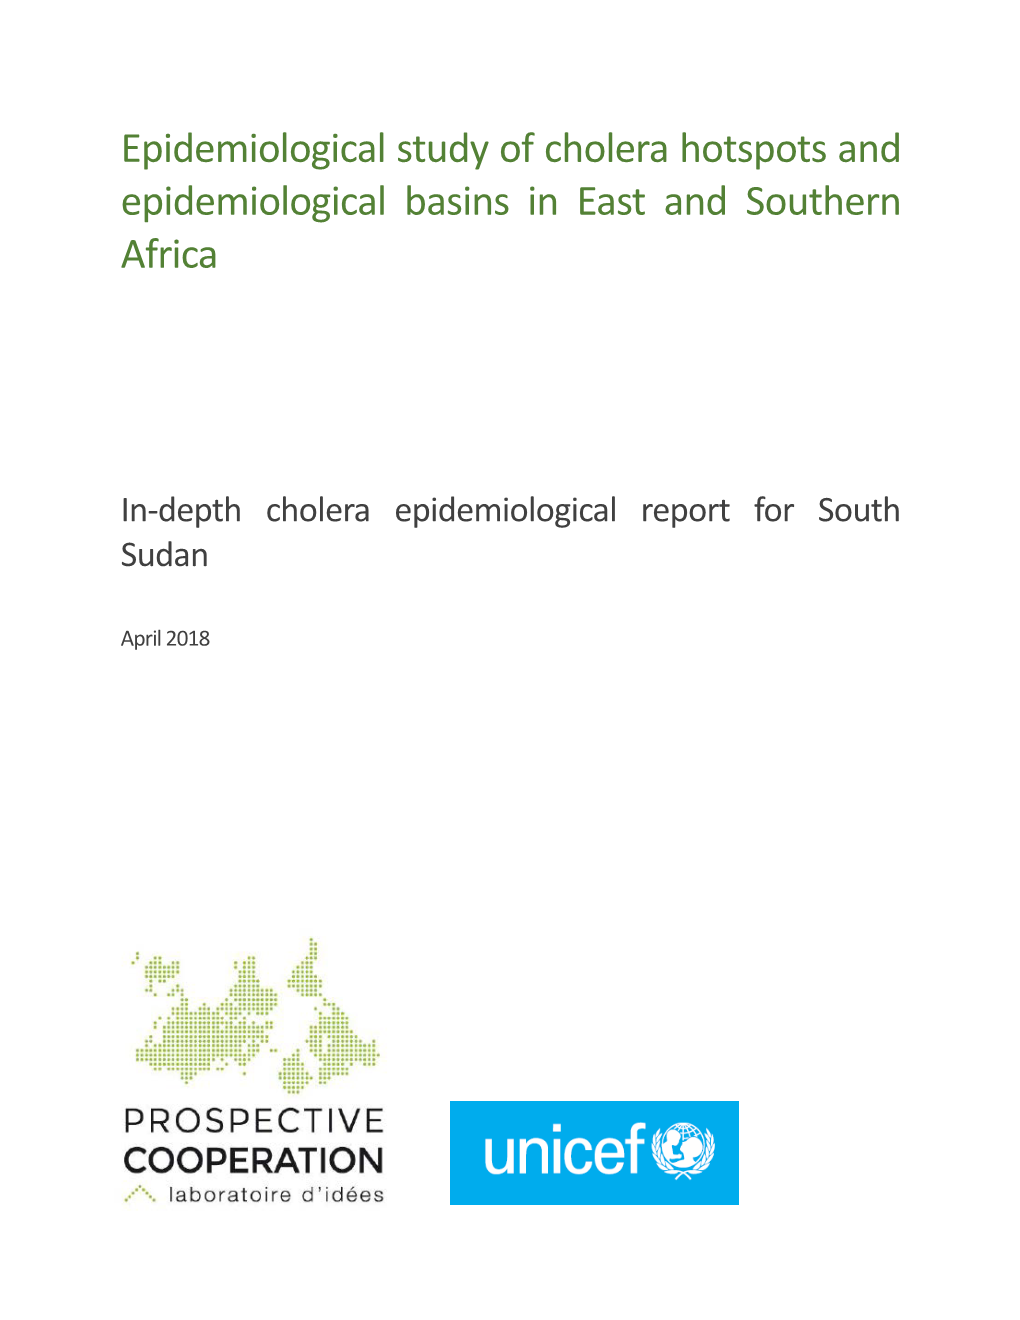 In-Depth Cholera Epidemiological Report for South Sudan